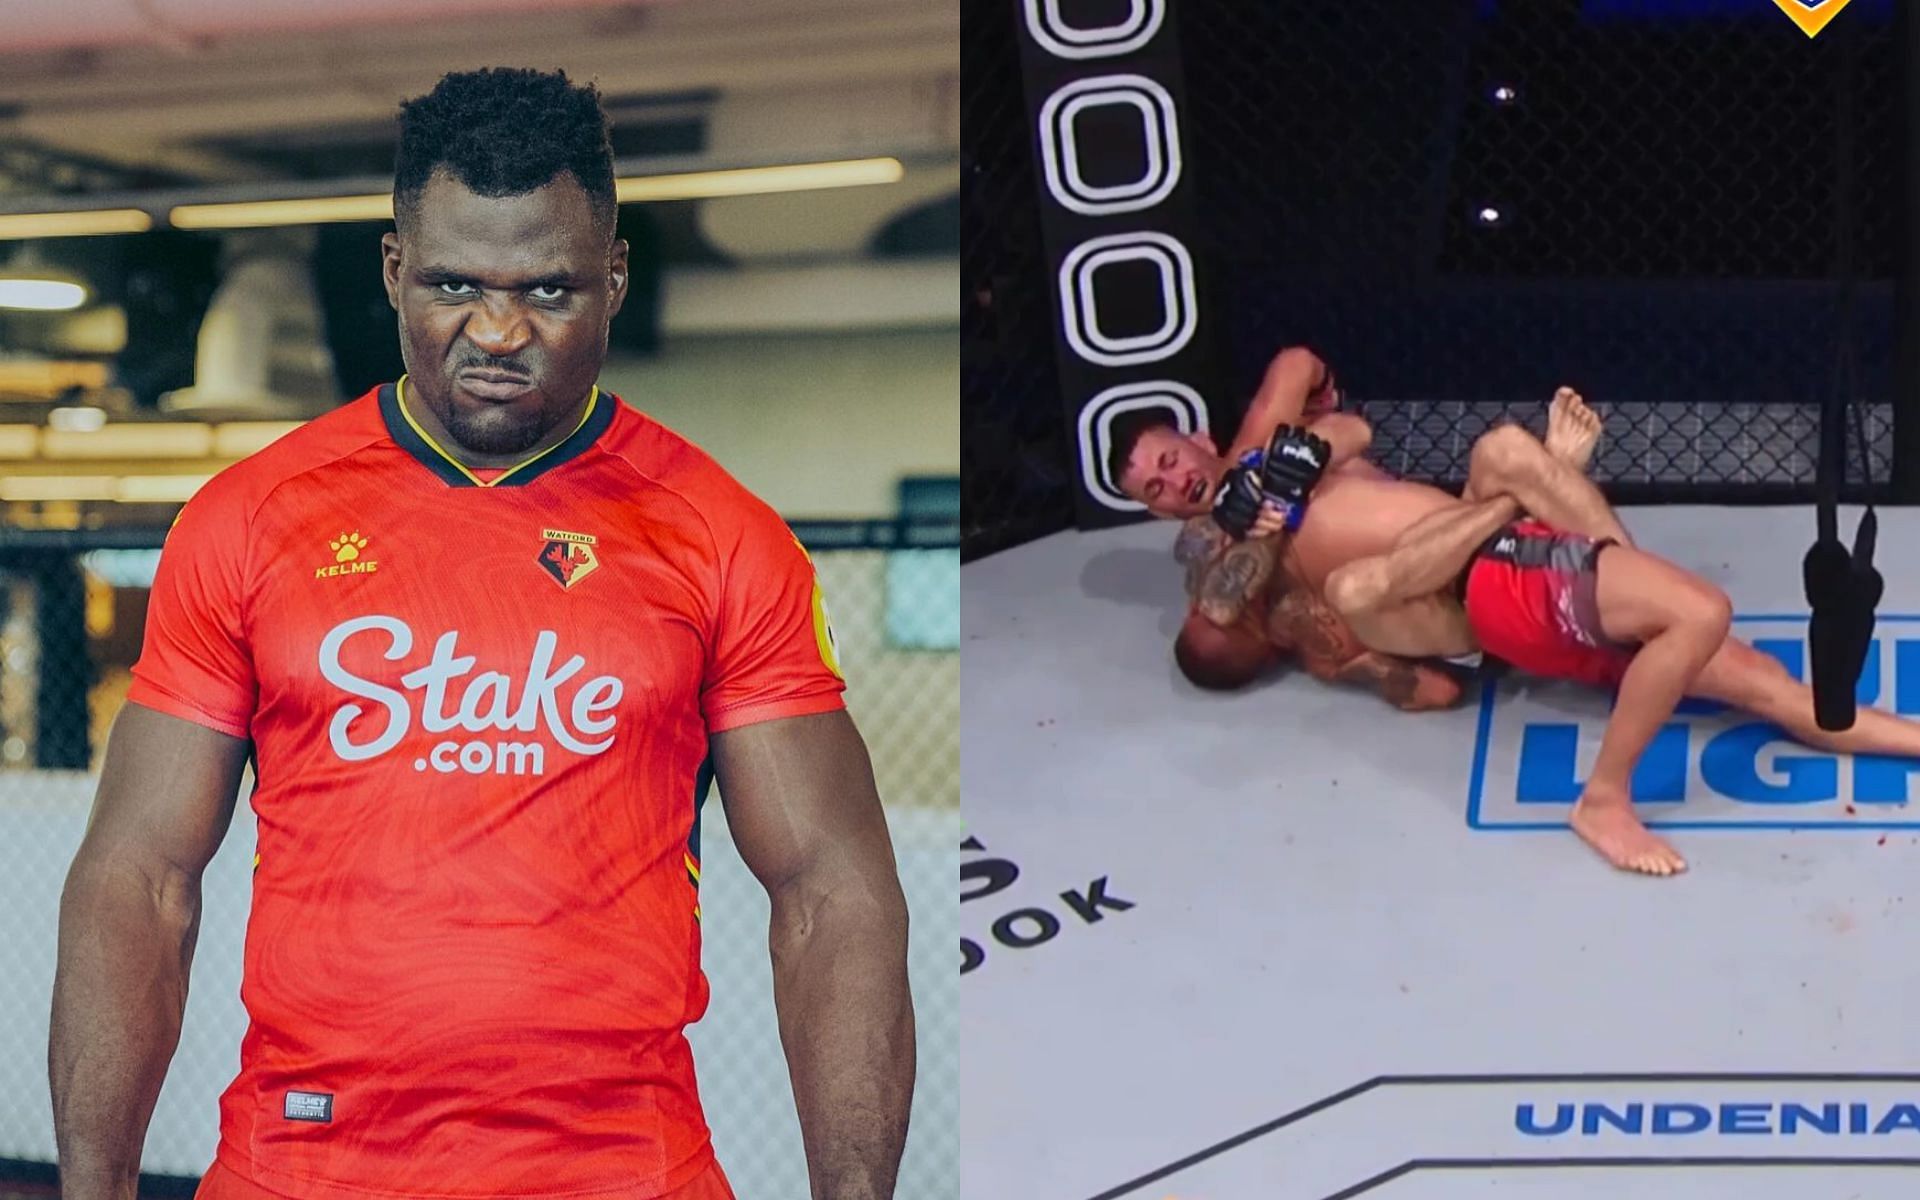 Francis Ngannou (left), Steven Ray submits Anthony Pettis (right) [Images courtesy: @francisngannou and @pflmma via Instagram]